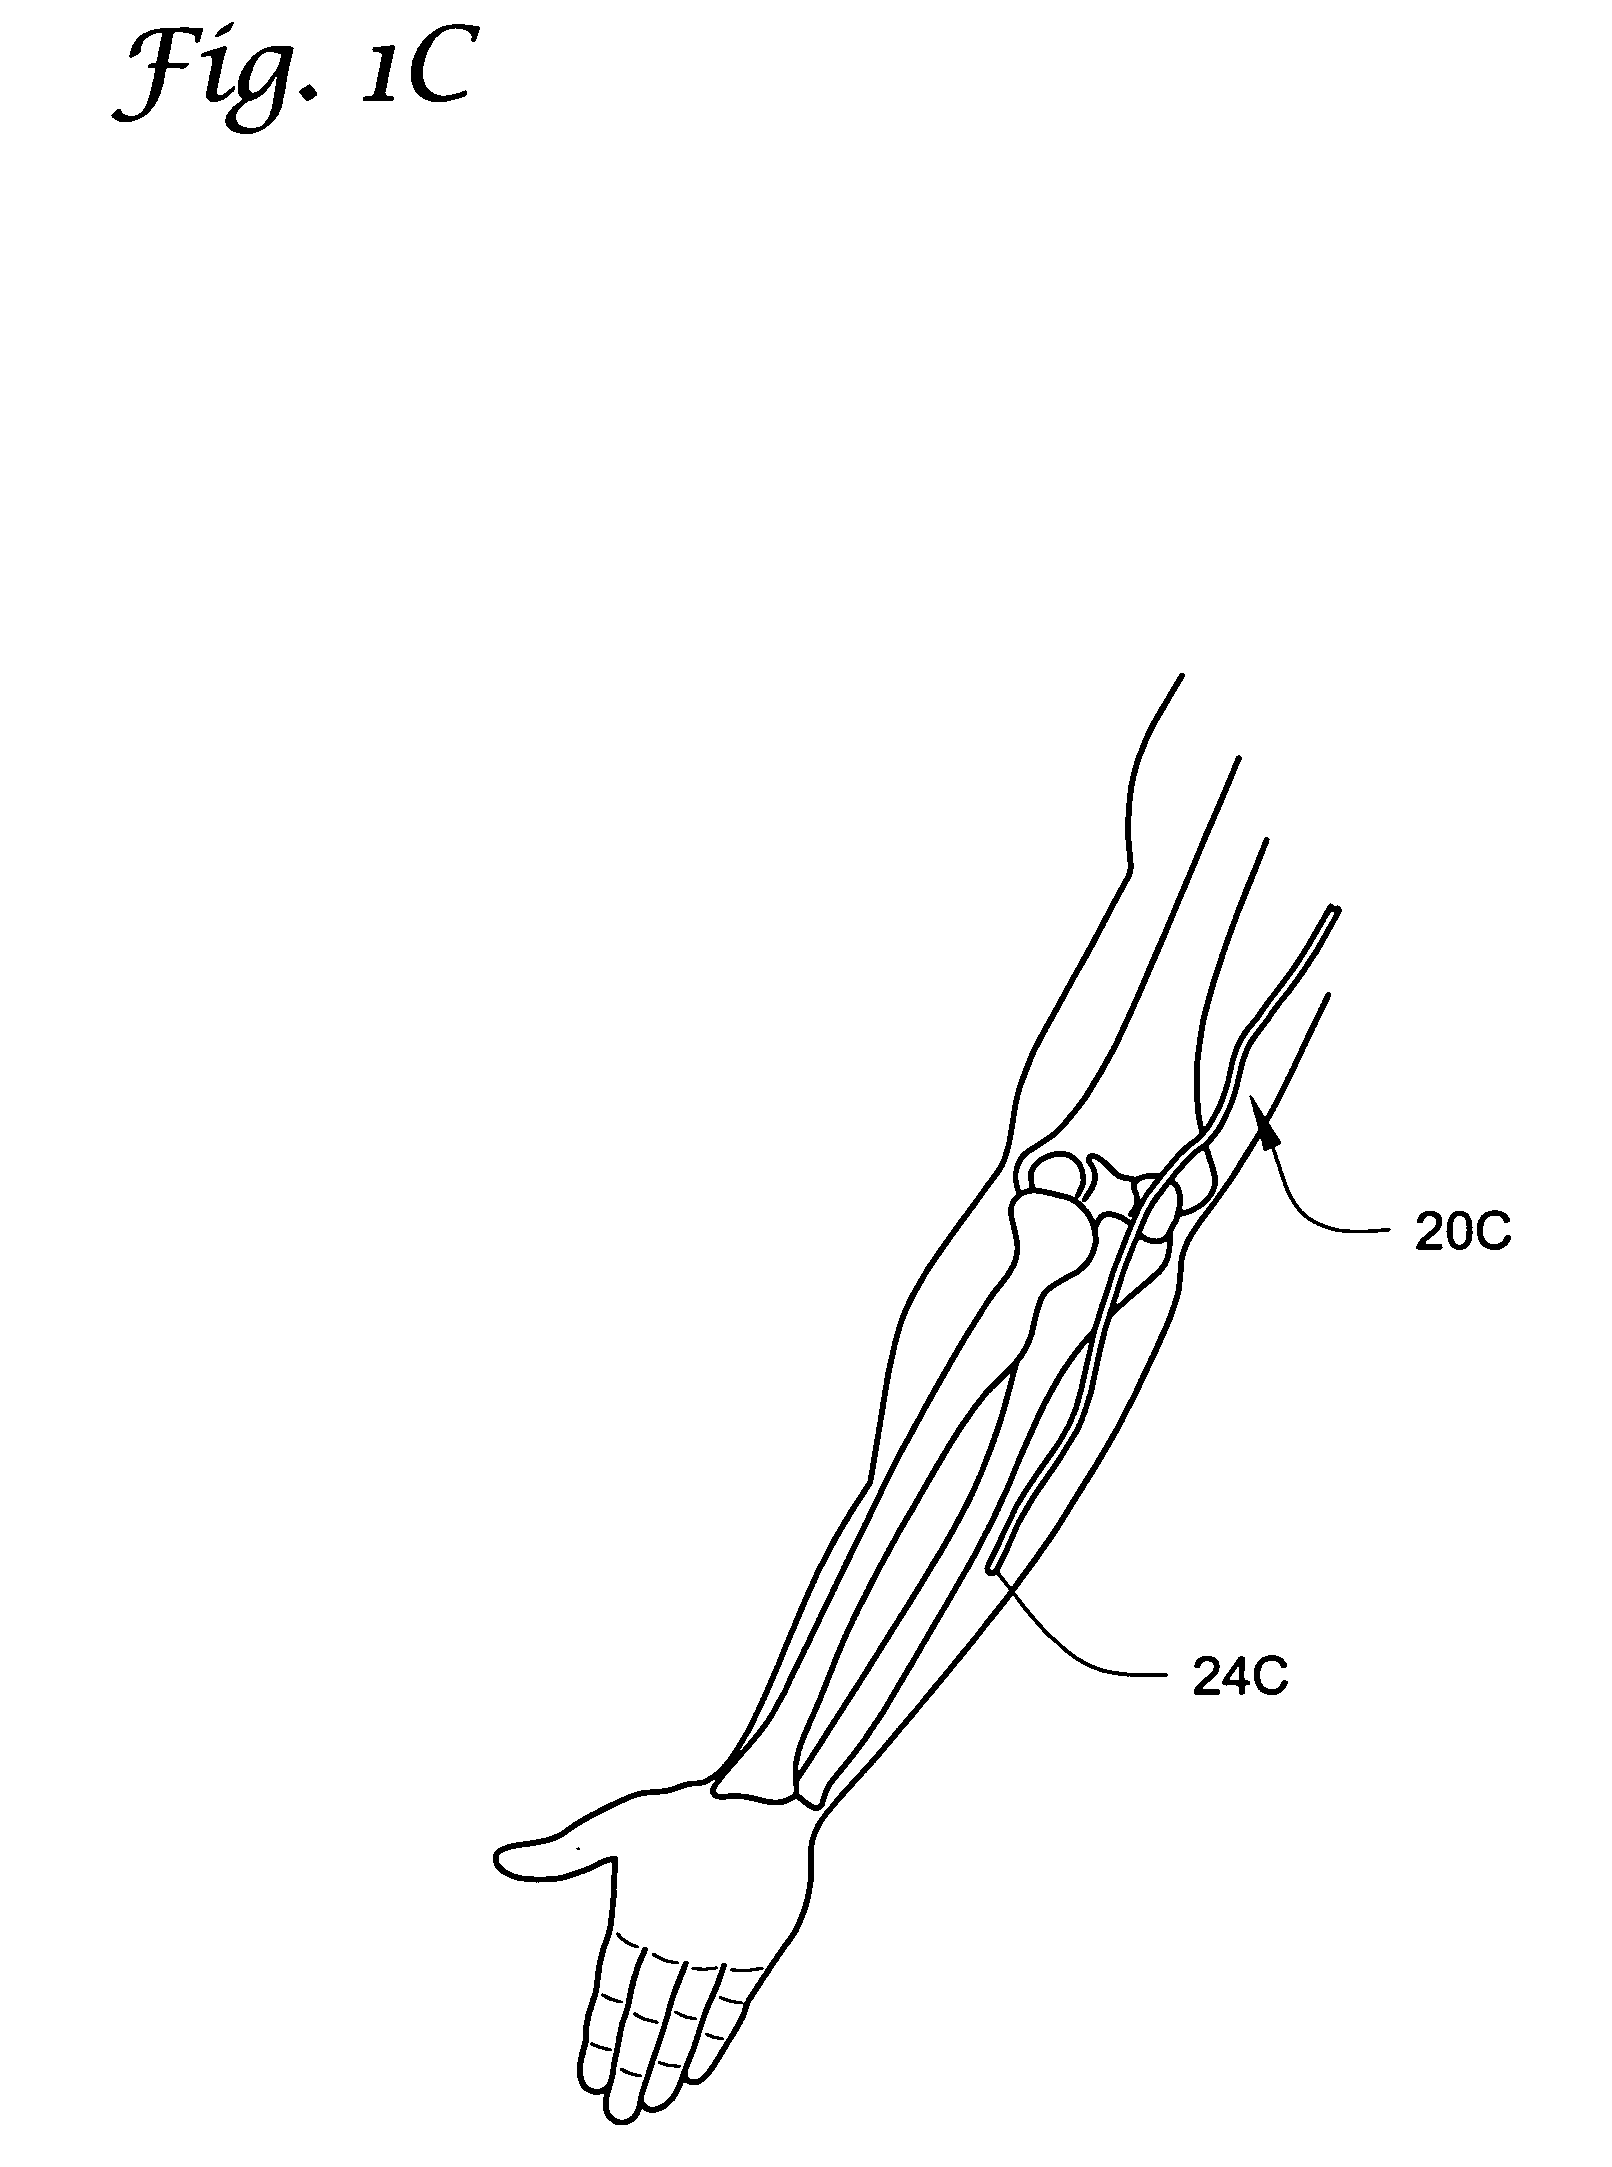 Catheters with tracking elements and permeable membranes